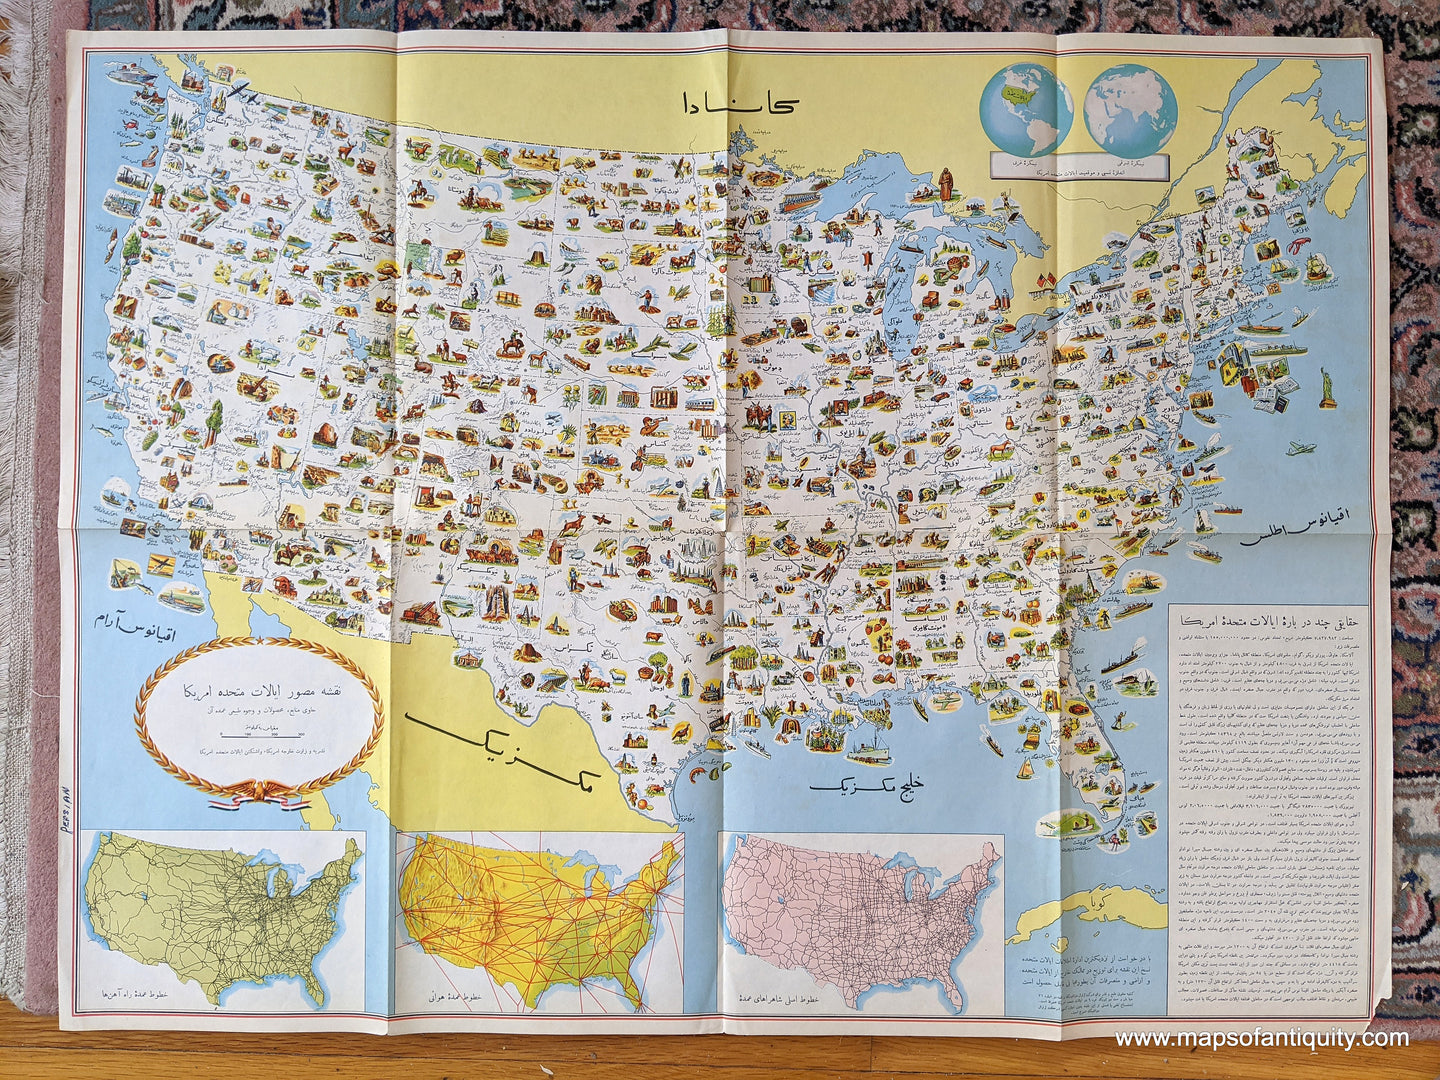 Antique-Map-United-States-America-Pictorial-Resources-Products-Natural-Features-US-USA-Department-of-State-1954-1950s-midcentury-20th-century-maps-of-antiquity